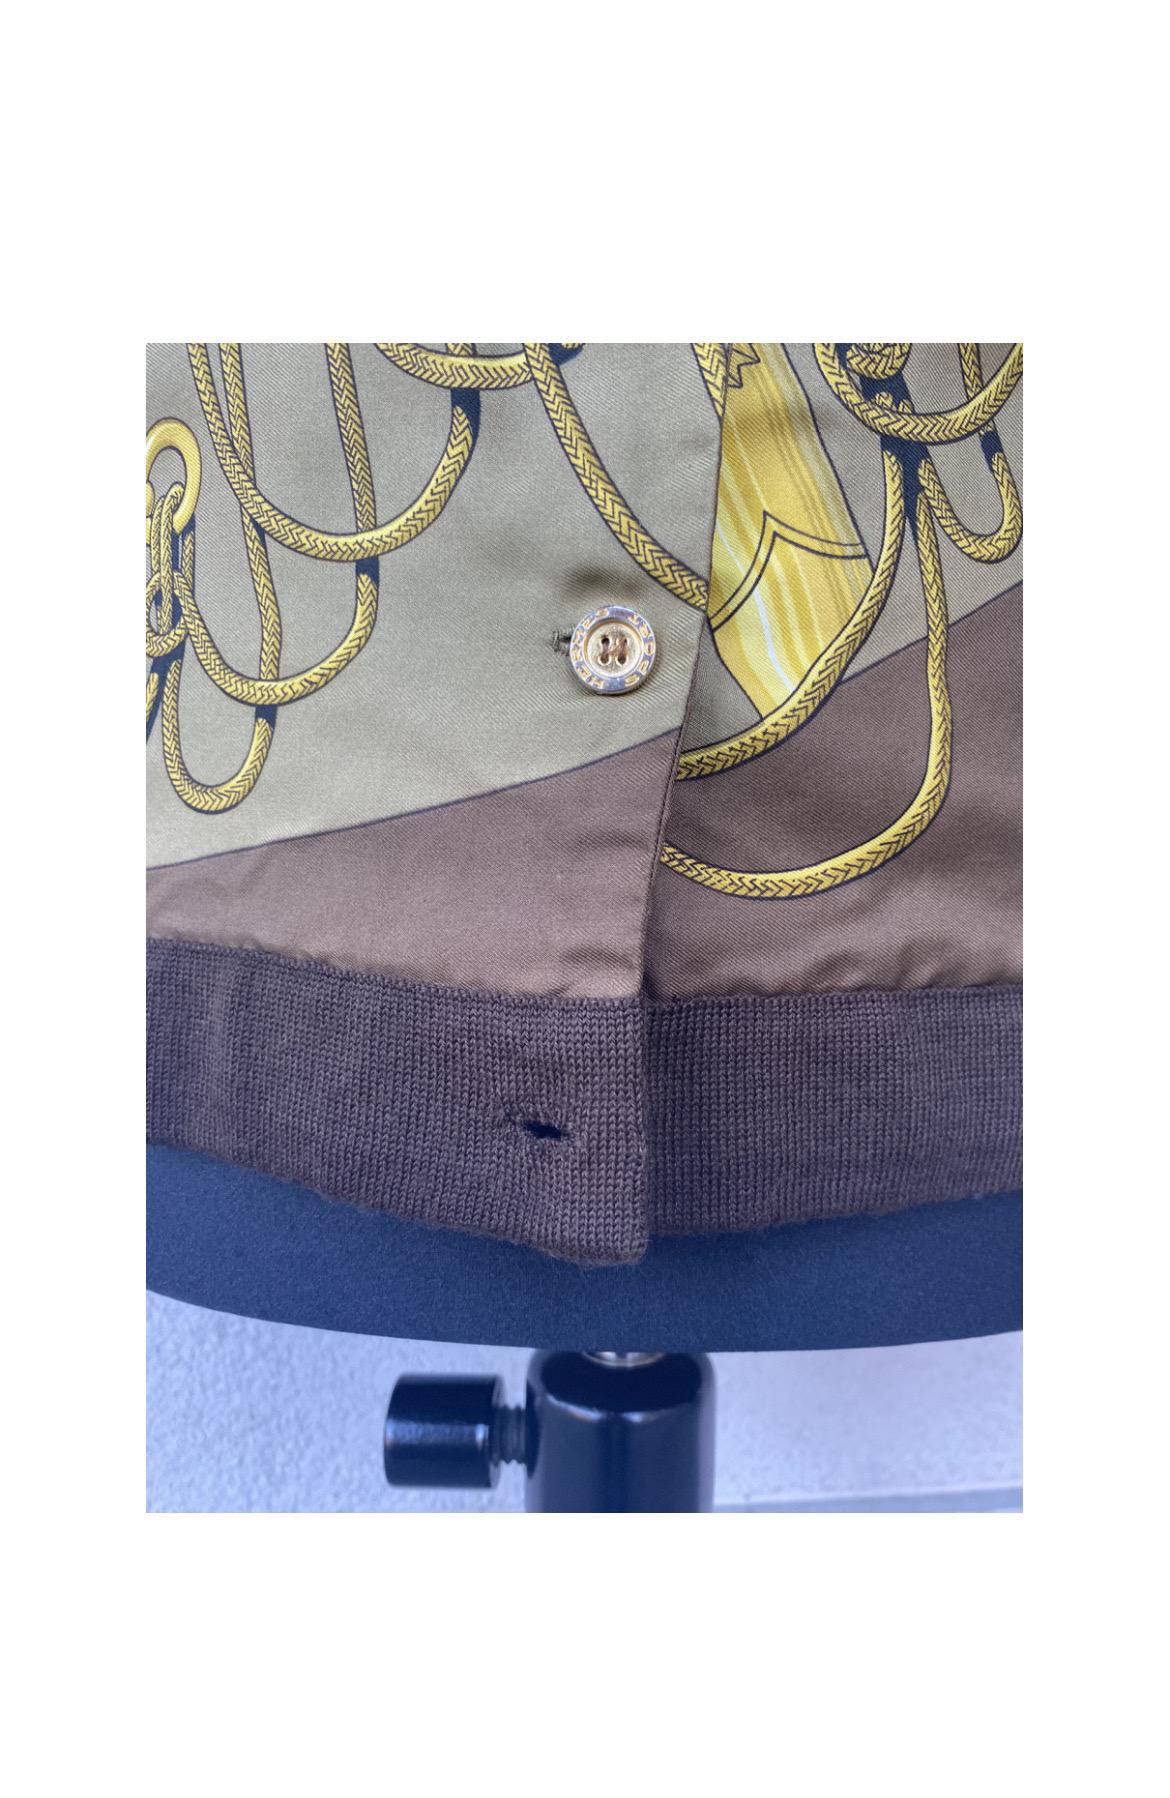 Hermes cardigan size M, in cashmere and silk blend, with golden logo buttons, unfortunately one is missing (the last one at the bottom), measurements: 
sleeve 63 cm, 
chest 42 cm, 
length 64 cm, 
shoulder 38 cm, 
in good condition.